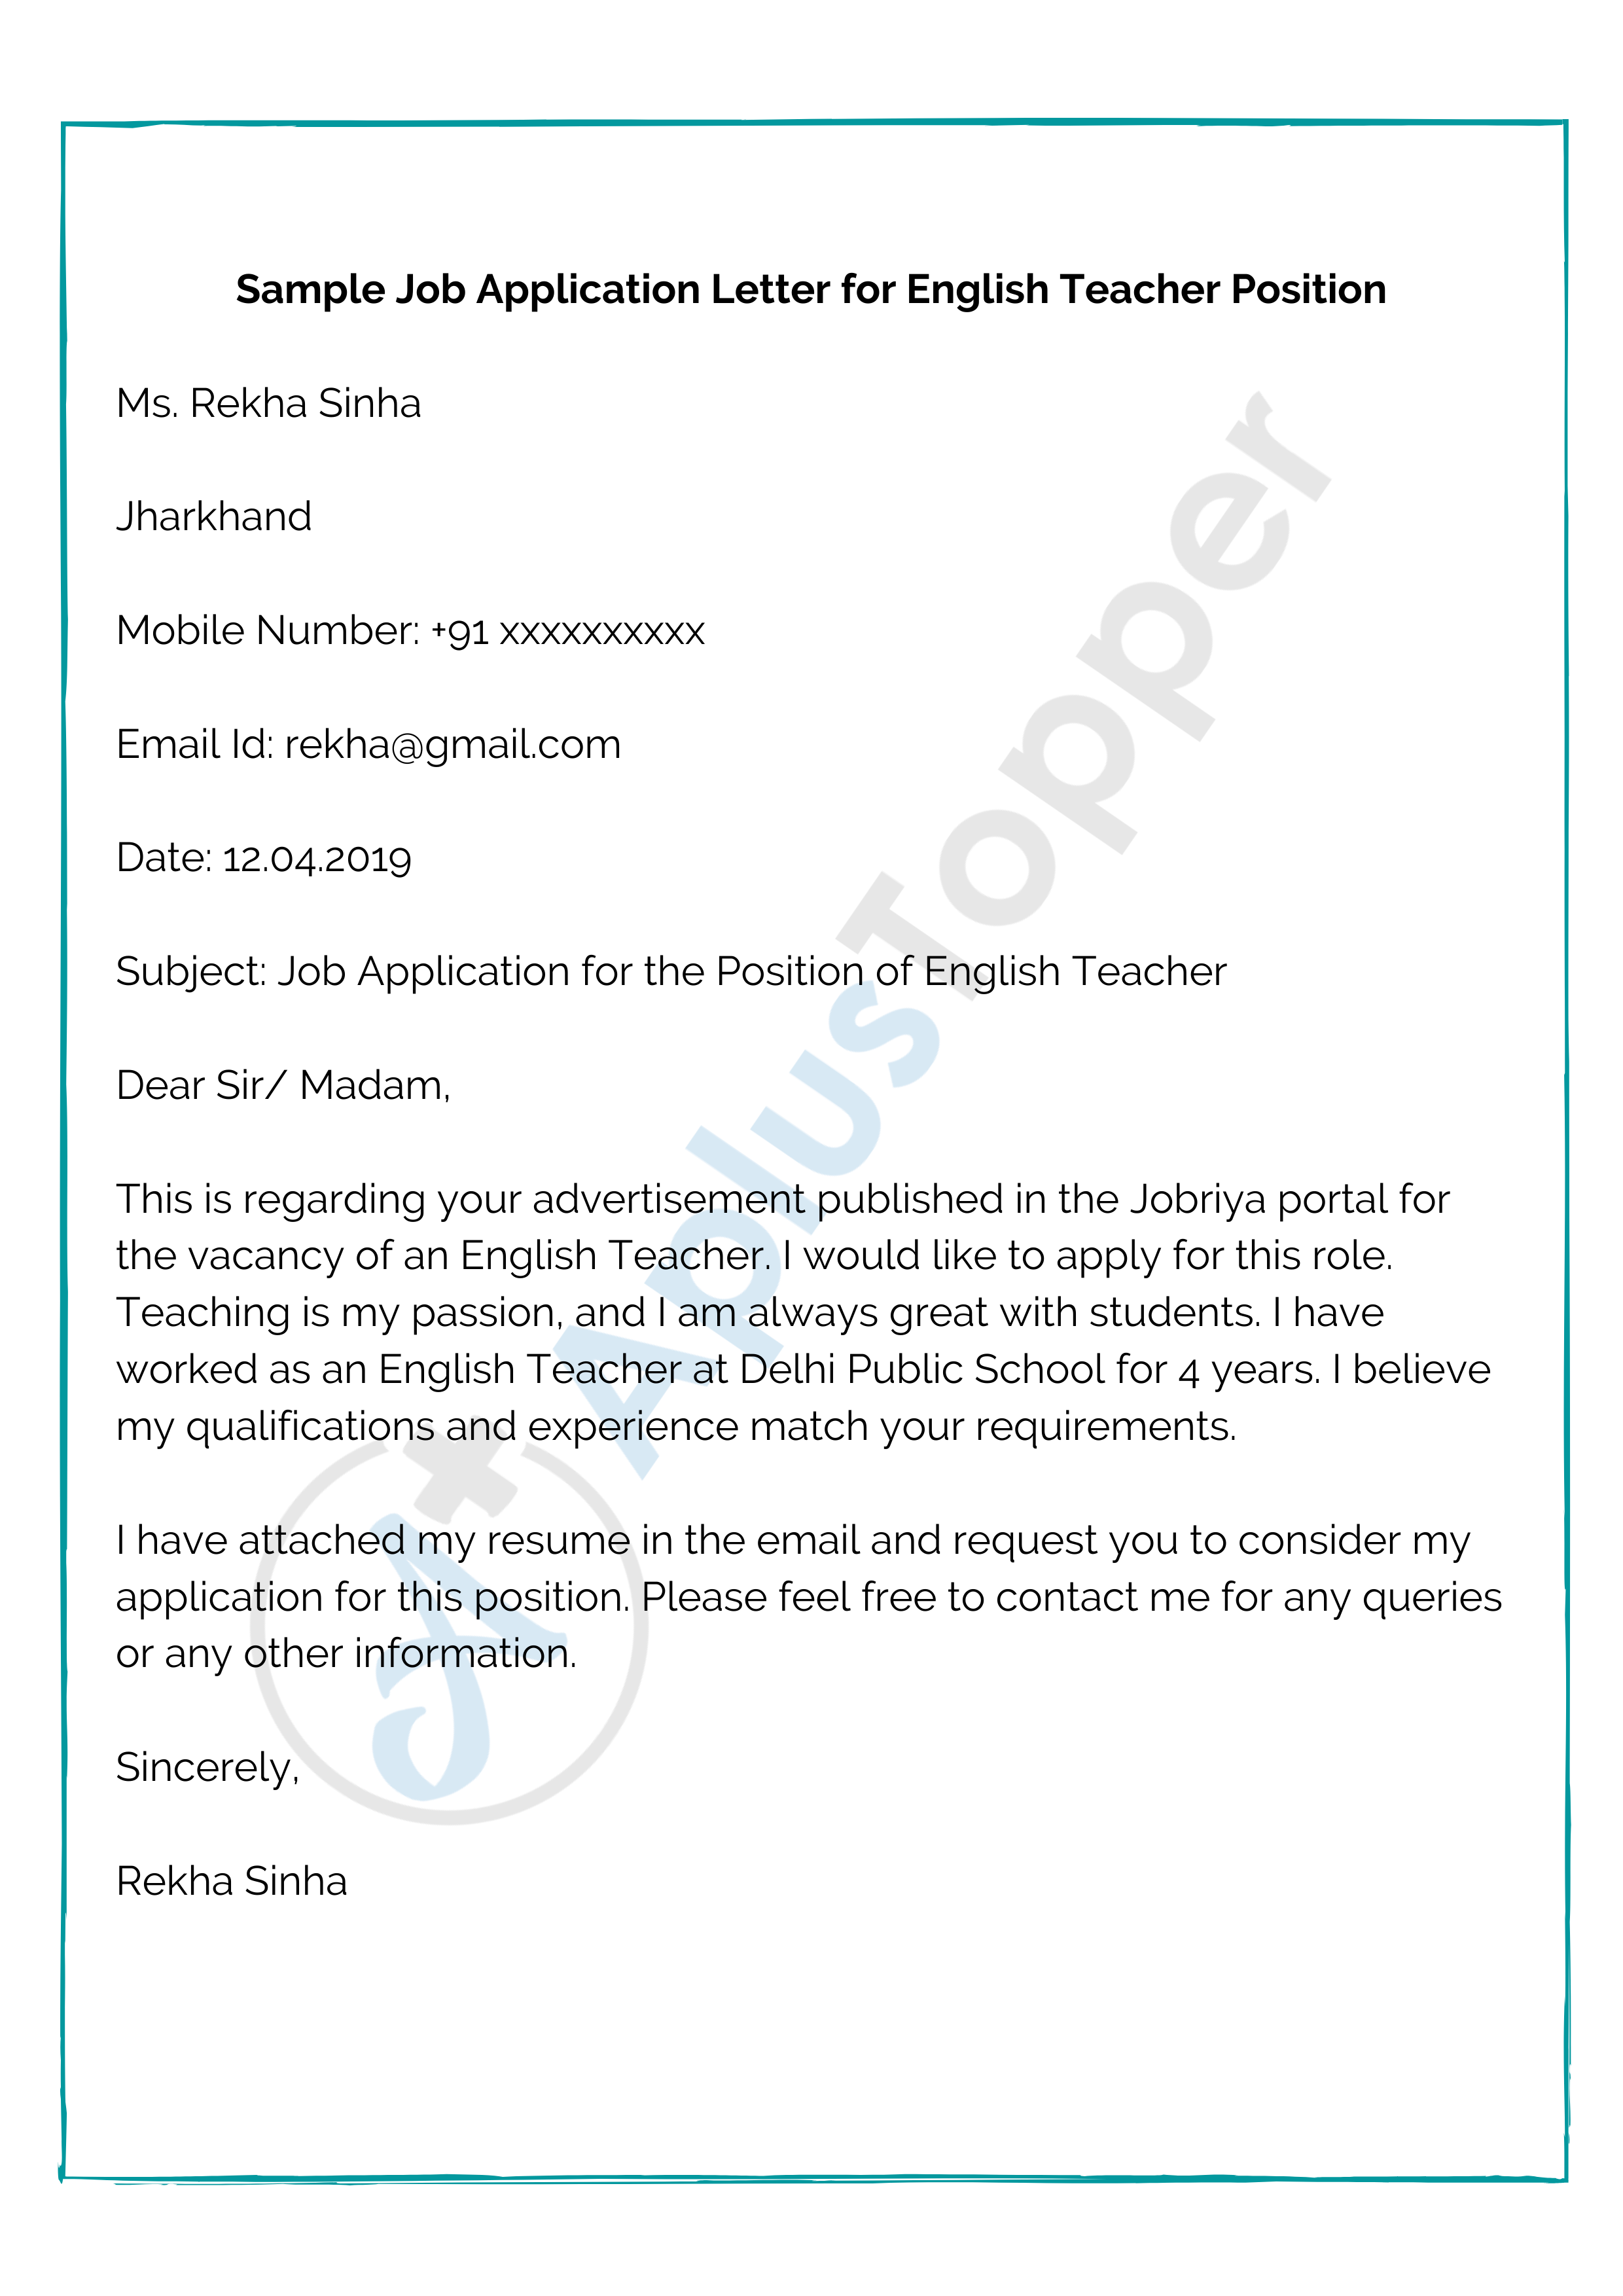 samples of application letter for any position